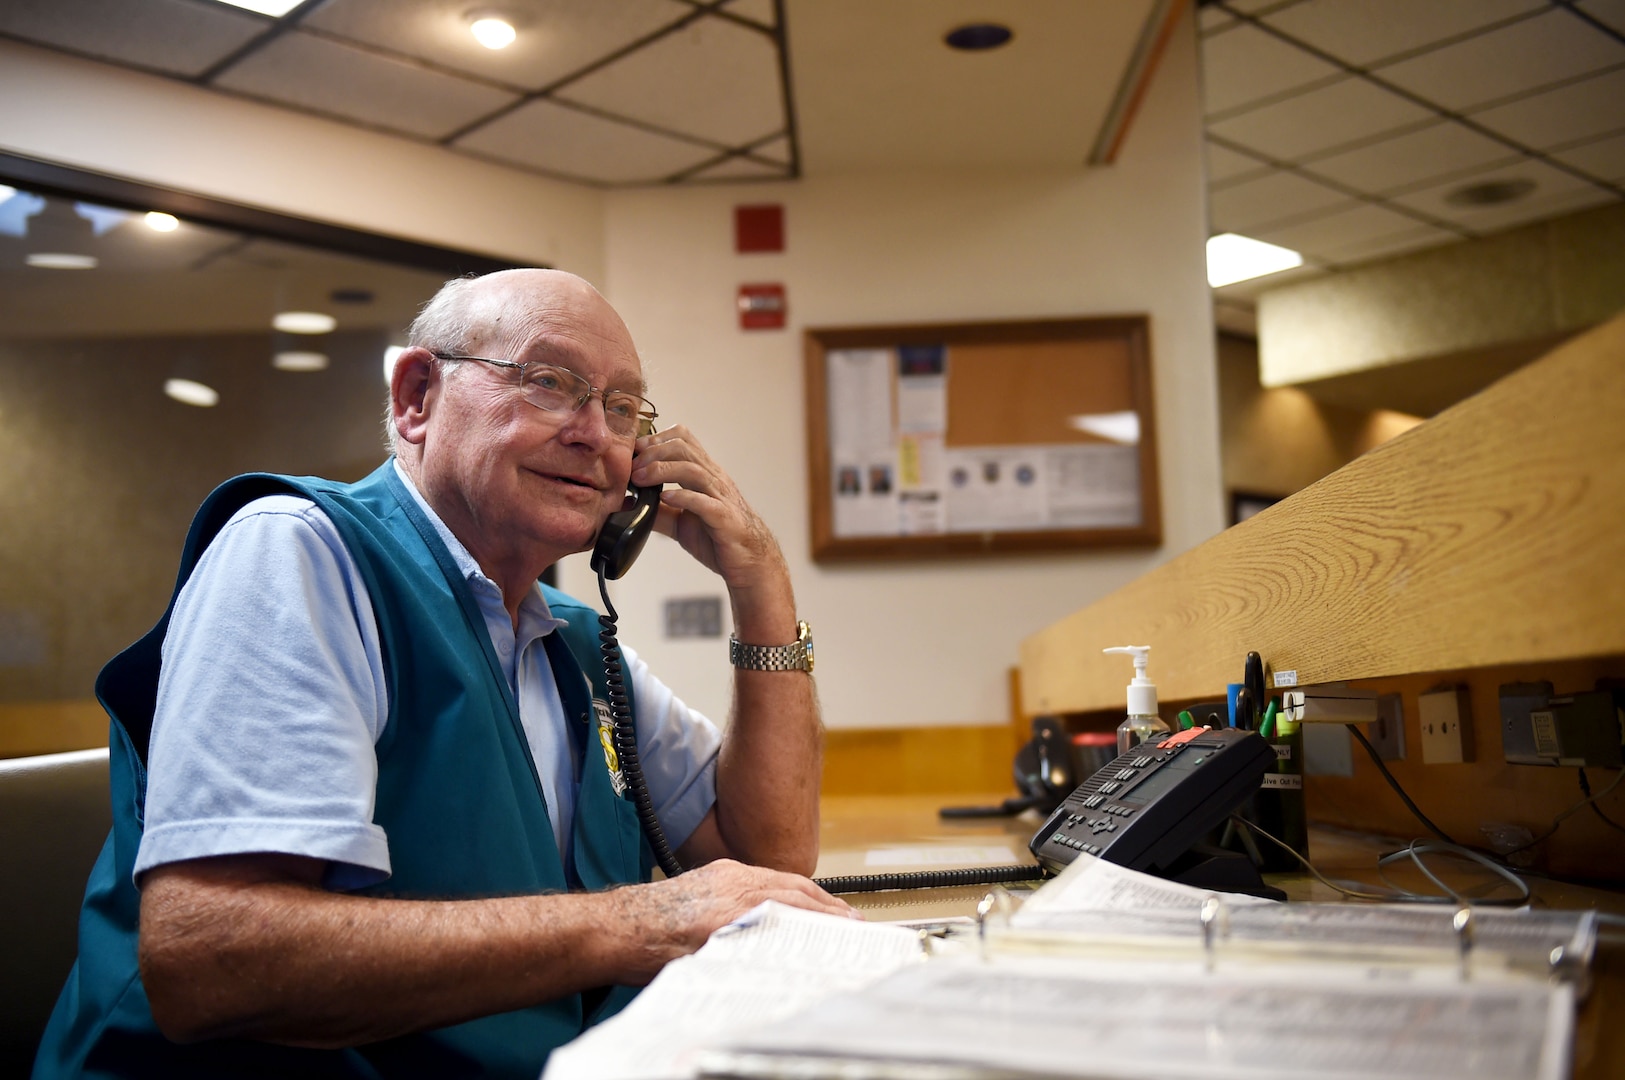 Wilford Hall volunteer Jack Kuttner answers the phone while manning the information desk at the Wilford Hall Ambulatory Surgical Center, Joint Base San Antonio-Lackland, Texas, April 12, 2017. Volunteers can be spotted throughout Wilford Hall assisting patients and staff members.
